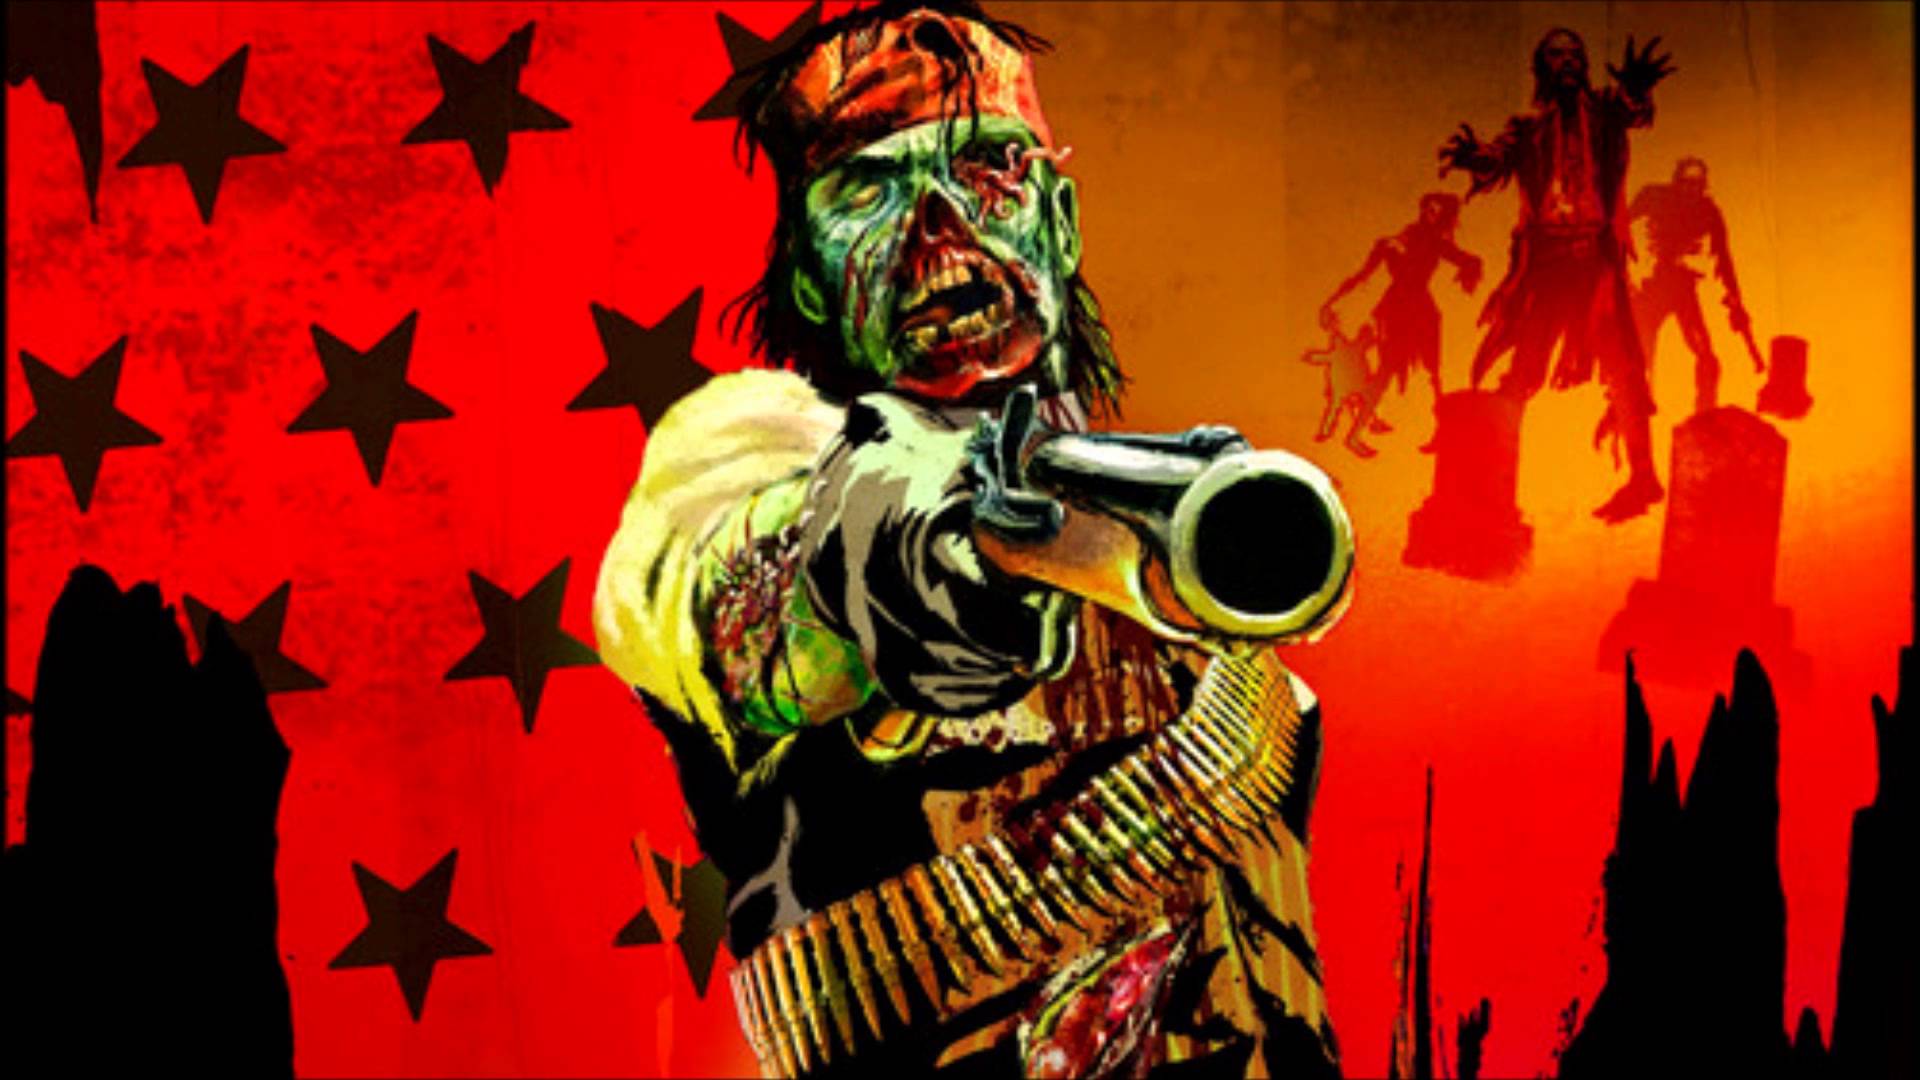 Red Dead Redemption: Undead Nightmare Backgrounds, Compatible - PC, Mobile, Gadgets| 1920x1080 px